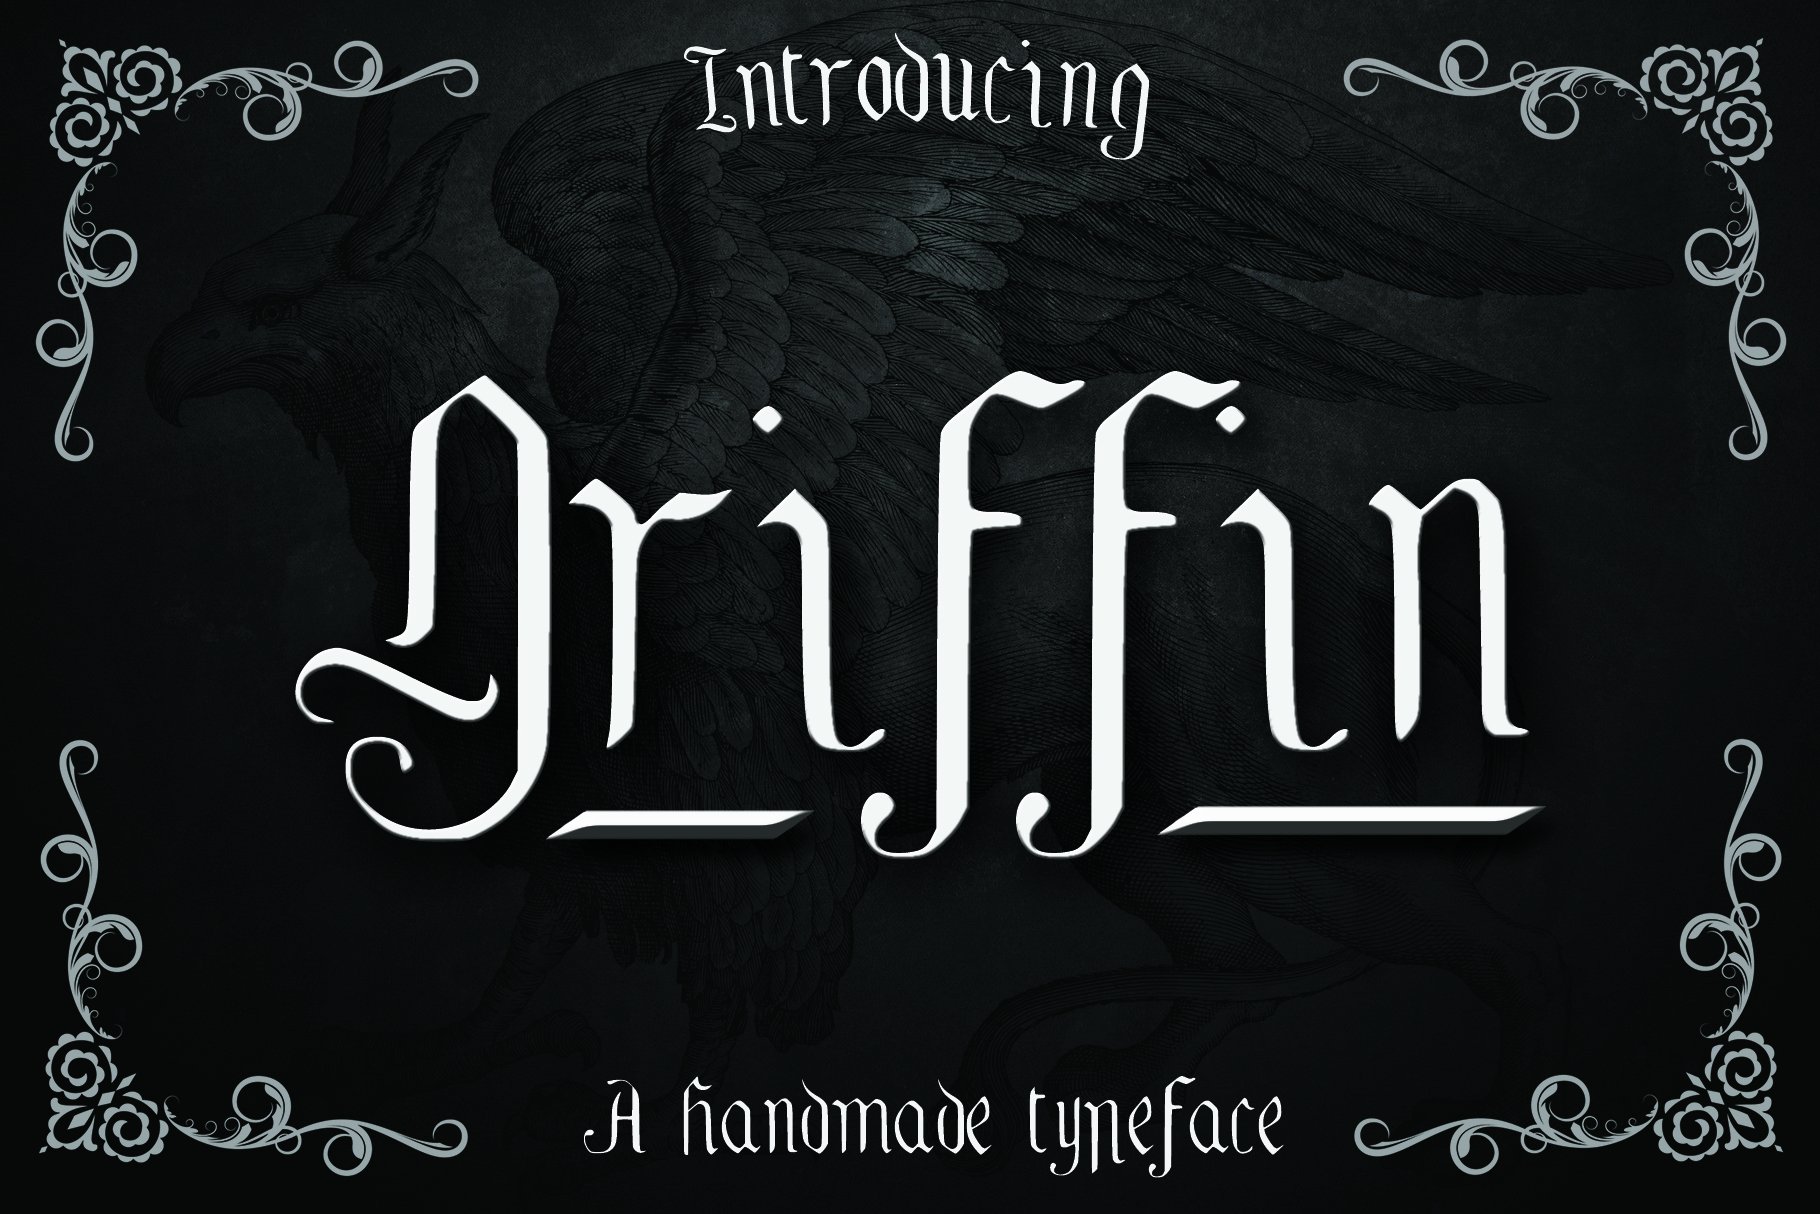 GRIFFIN, a Blackletter Typeface cover image.